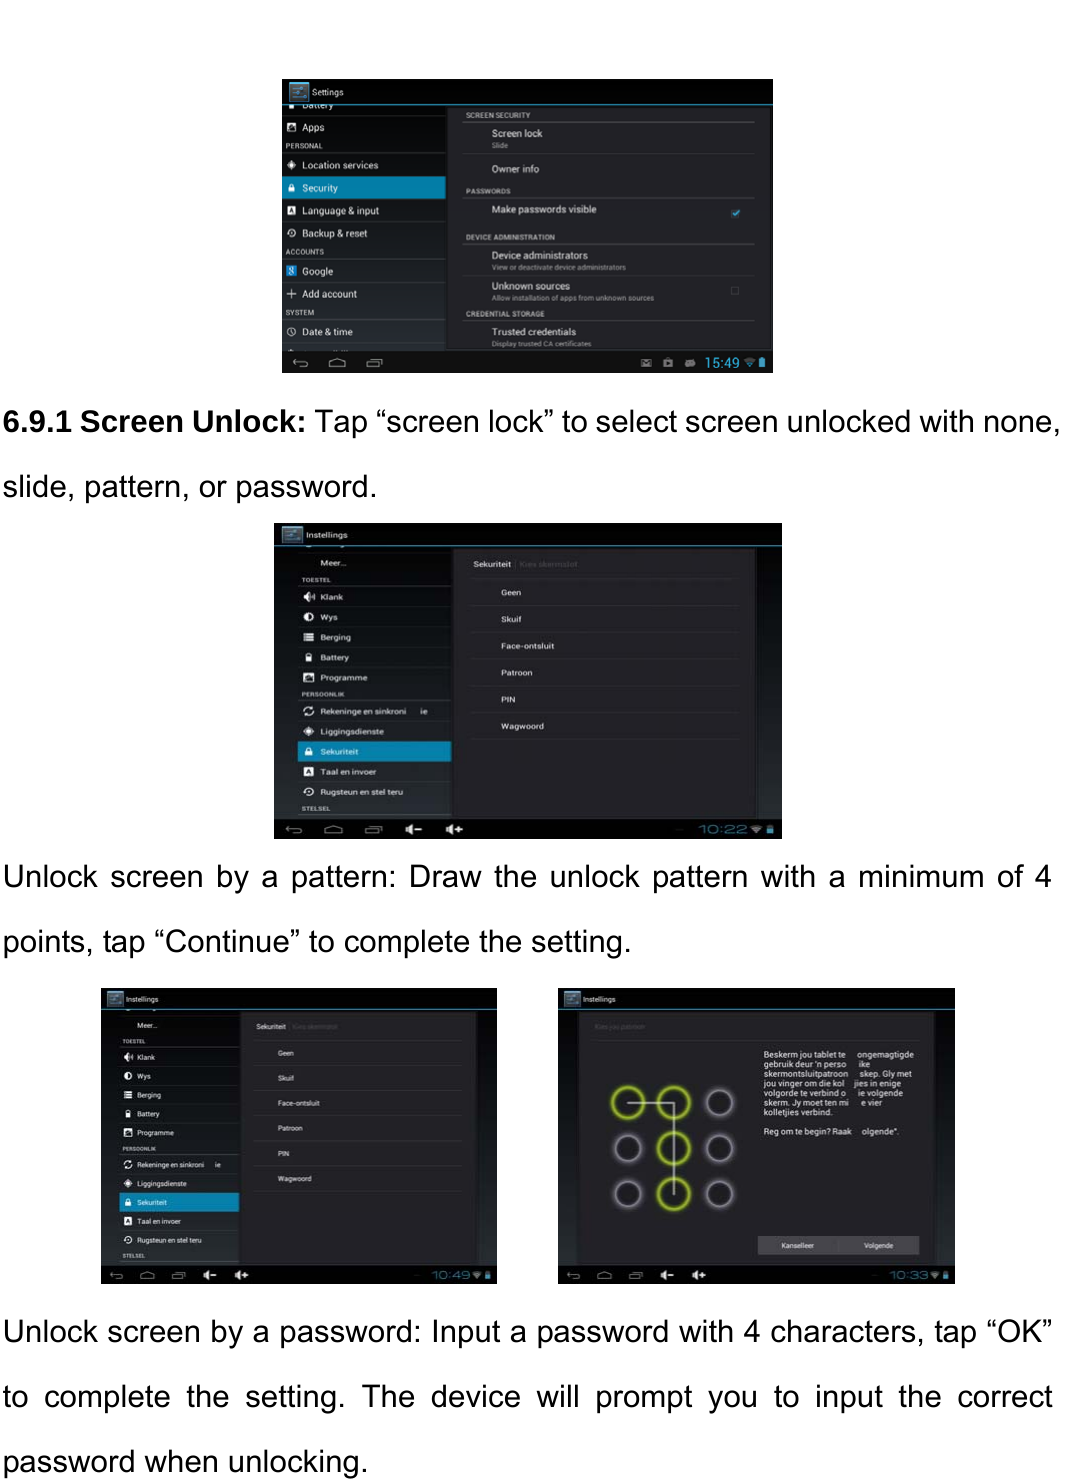     6.9.1 Screen Unlock: Tap “screen lock” to select screen unlocked with none, slide, pattern, or password.    Unlock screen by a pattern: Draw the unlock pattern with a minimum of 4 points, tap “Continue” to complete the setting.         Unlock screen by a password: Input a password with 4 characters, tap “OK” to complete the setting. The device will prompt you to input the correct password when unlocking.   